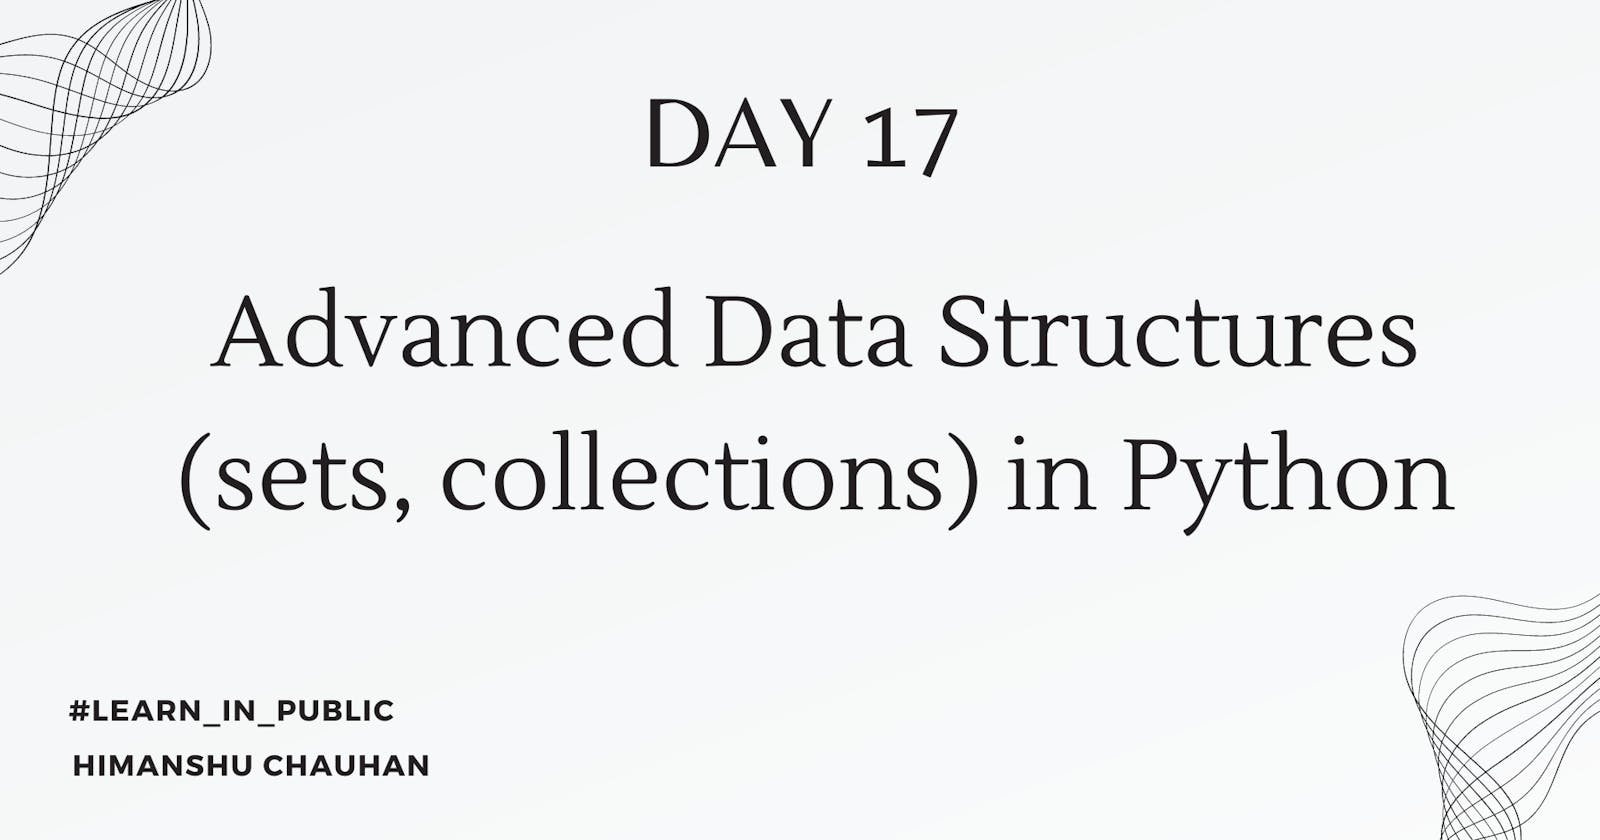 Day 17: Advanced Data Structures (sets, collections) in Python